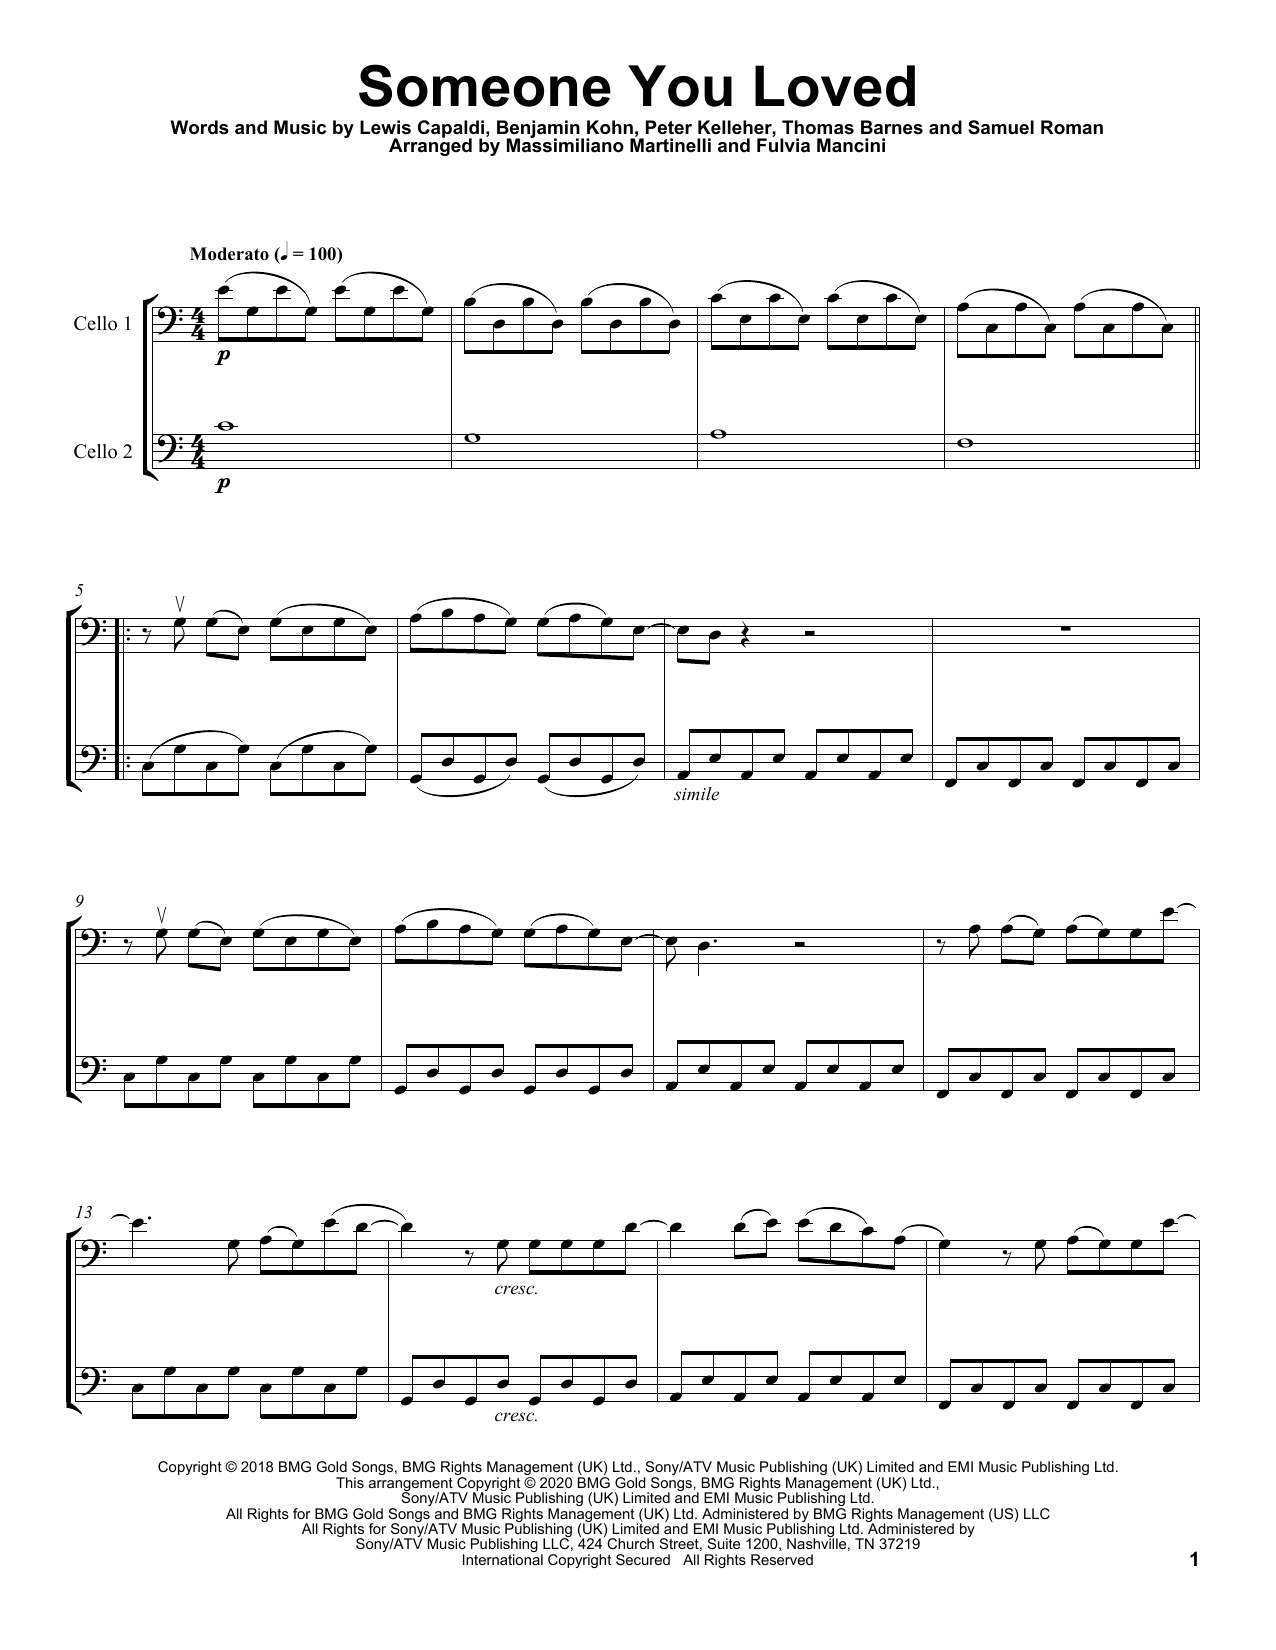 Download Mr. & Mrs. Cello Someone You Loved Sheet Music